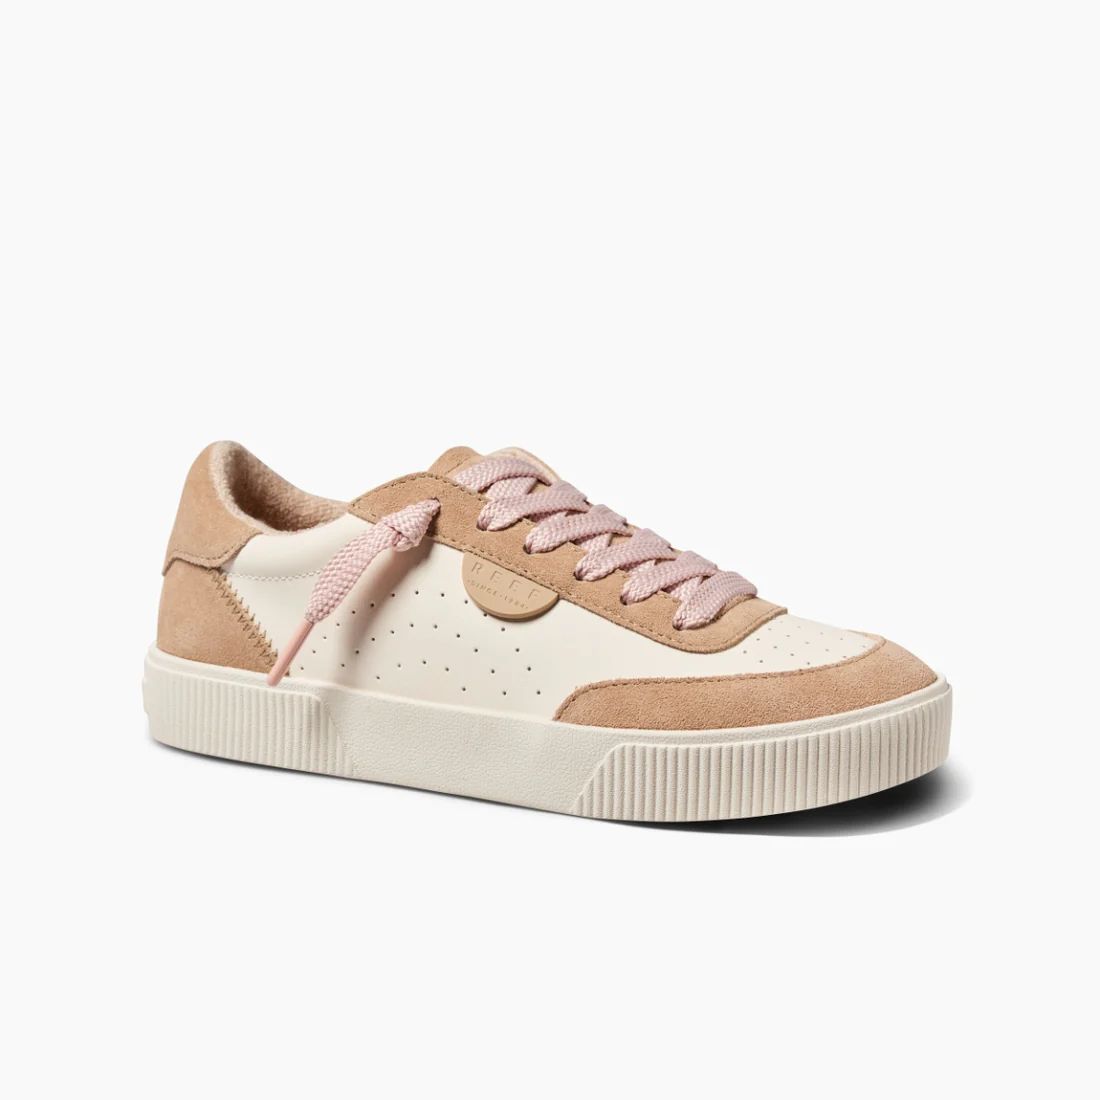 Women's Lay Day Seas Shoes in Cafe Cream Lese | REEF® | Reef